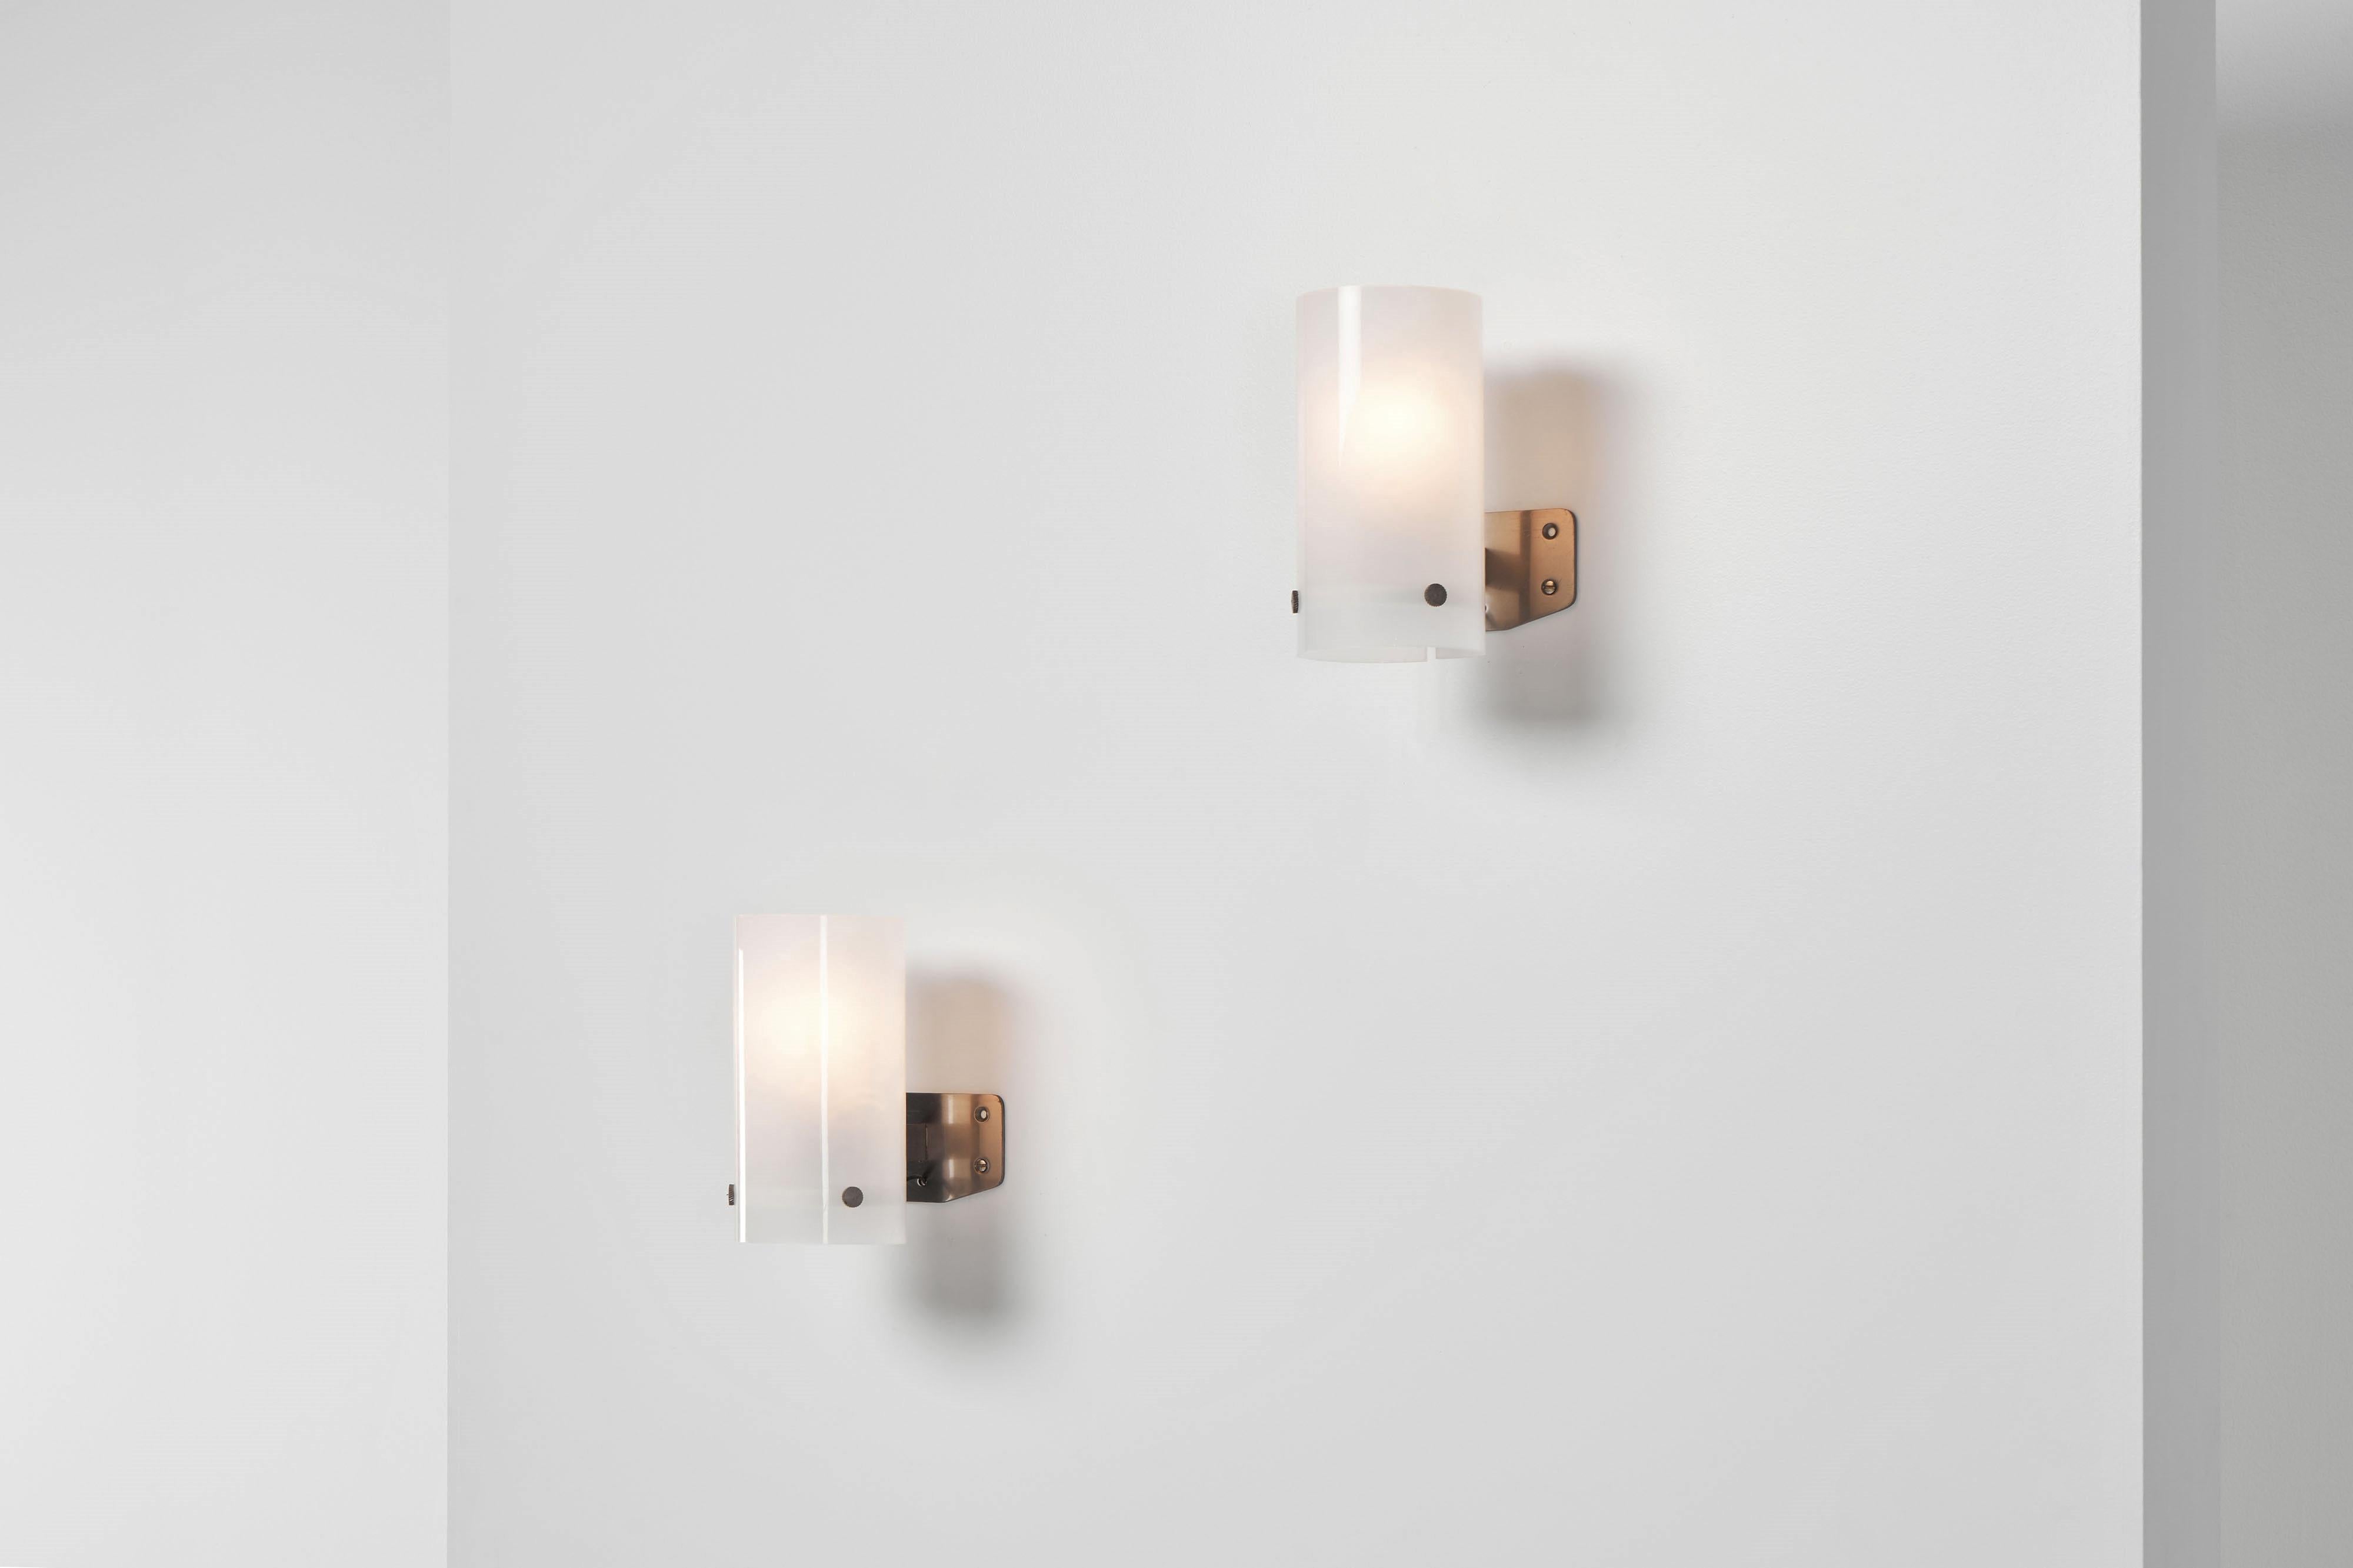 Exquisite LP8 sconces wall lamps by Ignazio Gardella designed in 1955 for Azucena Italy, an esteemed Italian brand. Azucena was one of the leading luxury furniture, accessories and light producers from the mid 20th century. These sconces showcase